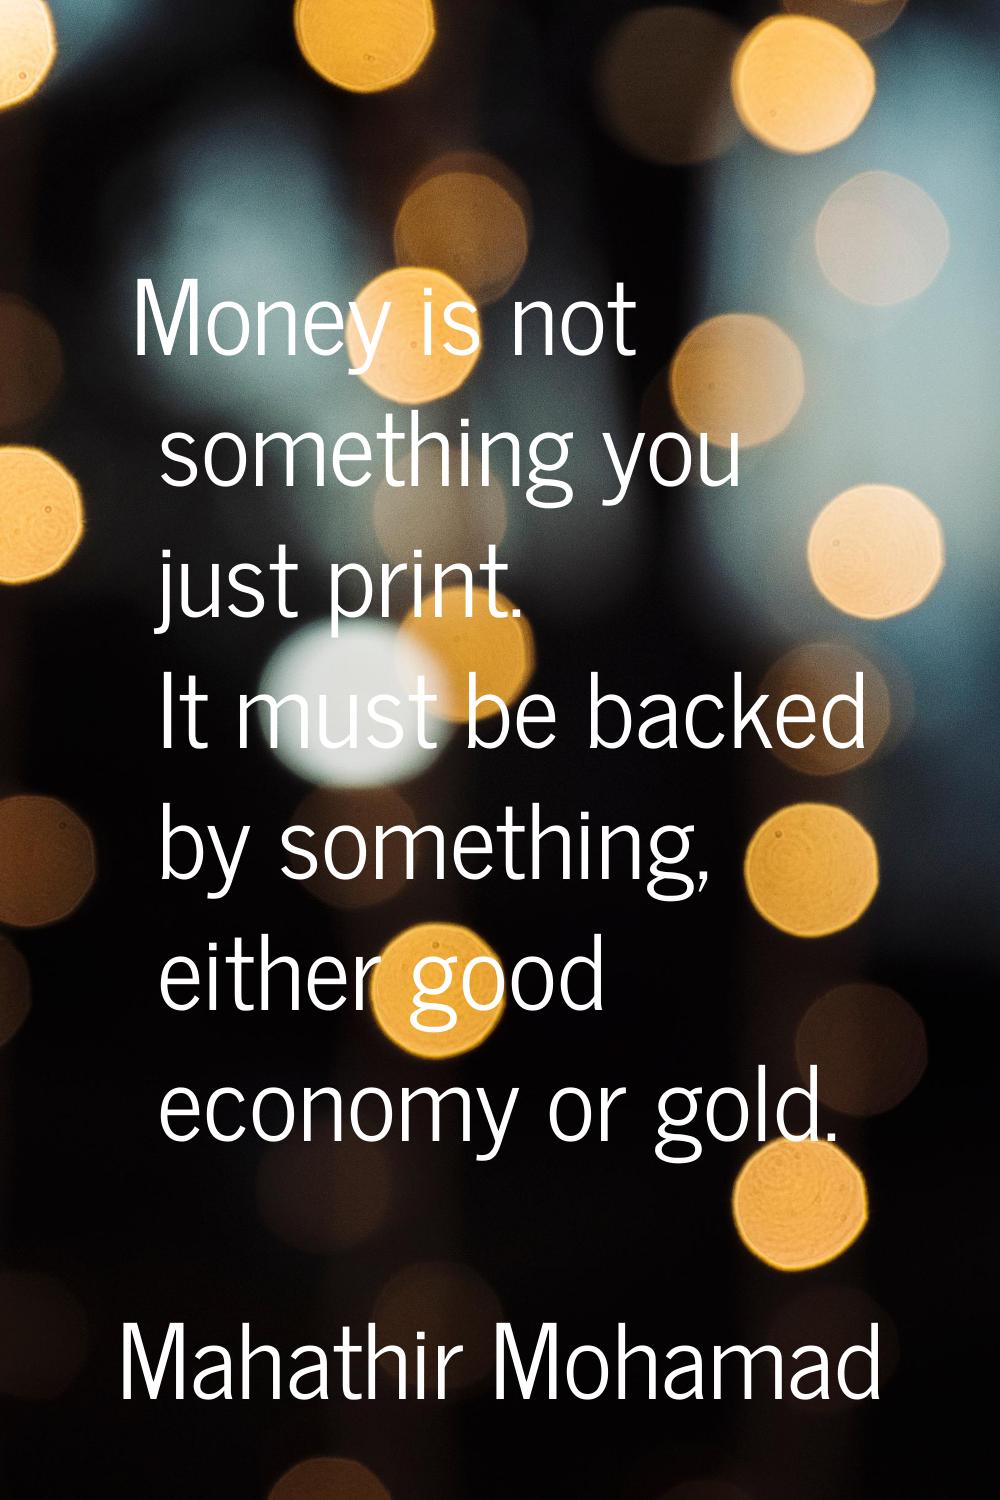 Money is not something you just print. It must be backed by something, either good economy or gold.